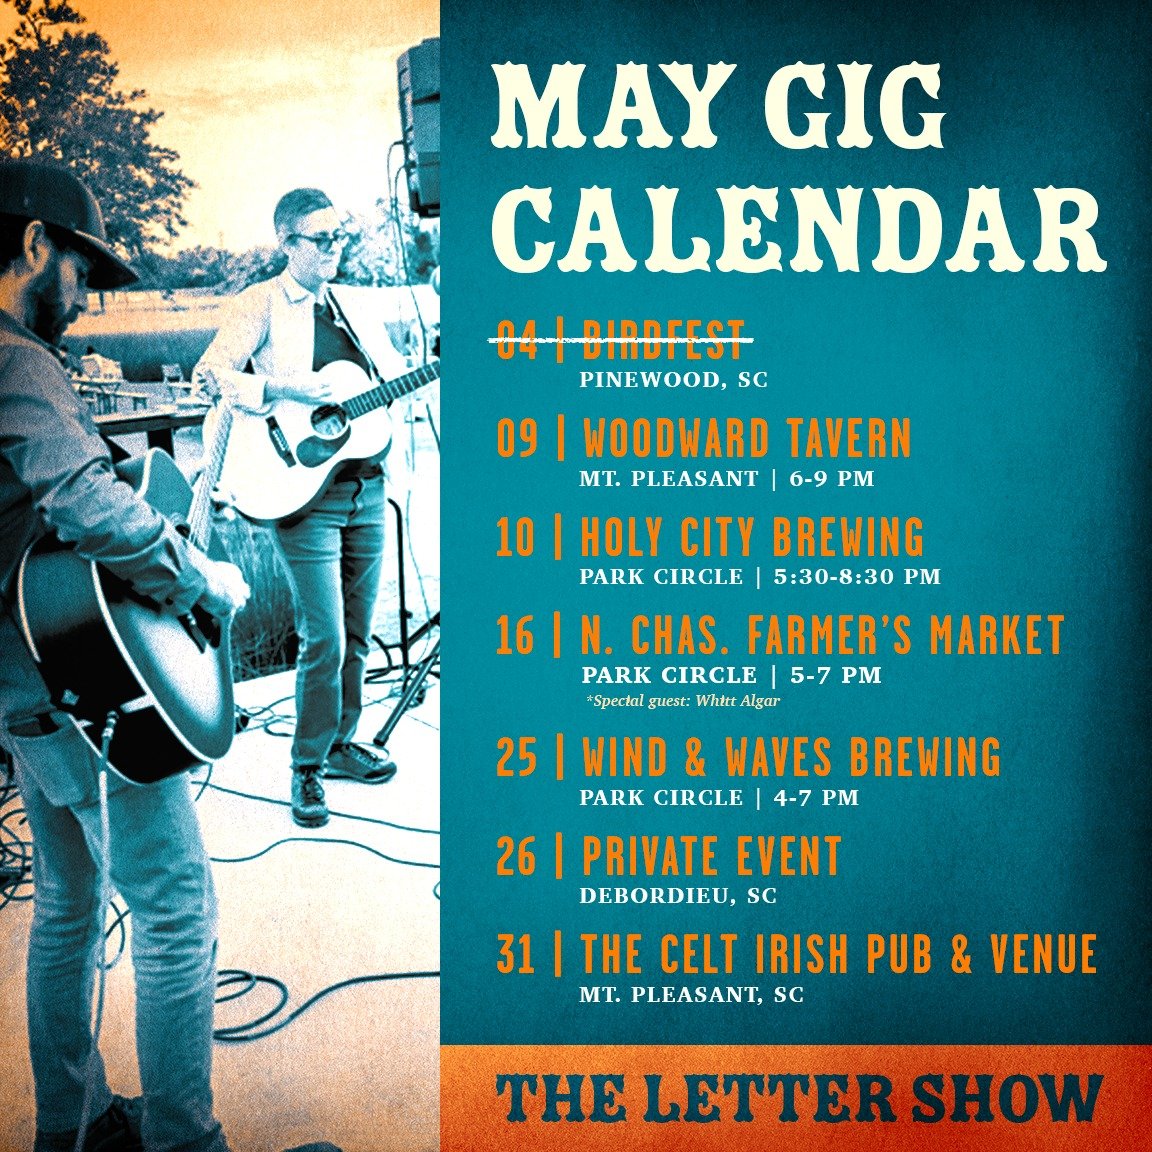 Almost a third of the way through the month so we figured it was time to share what we've got going on in May! After our fun excursion up to Pinewood, we've got a solid slate of local gigs and one out of town event to fill out our calendar.

We'll be